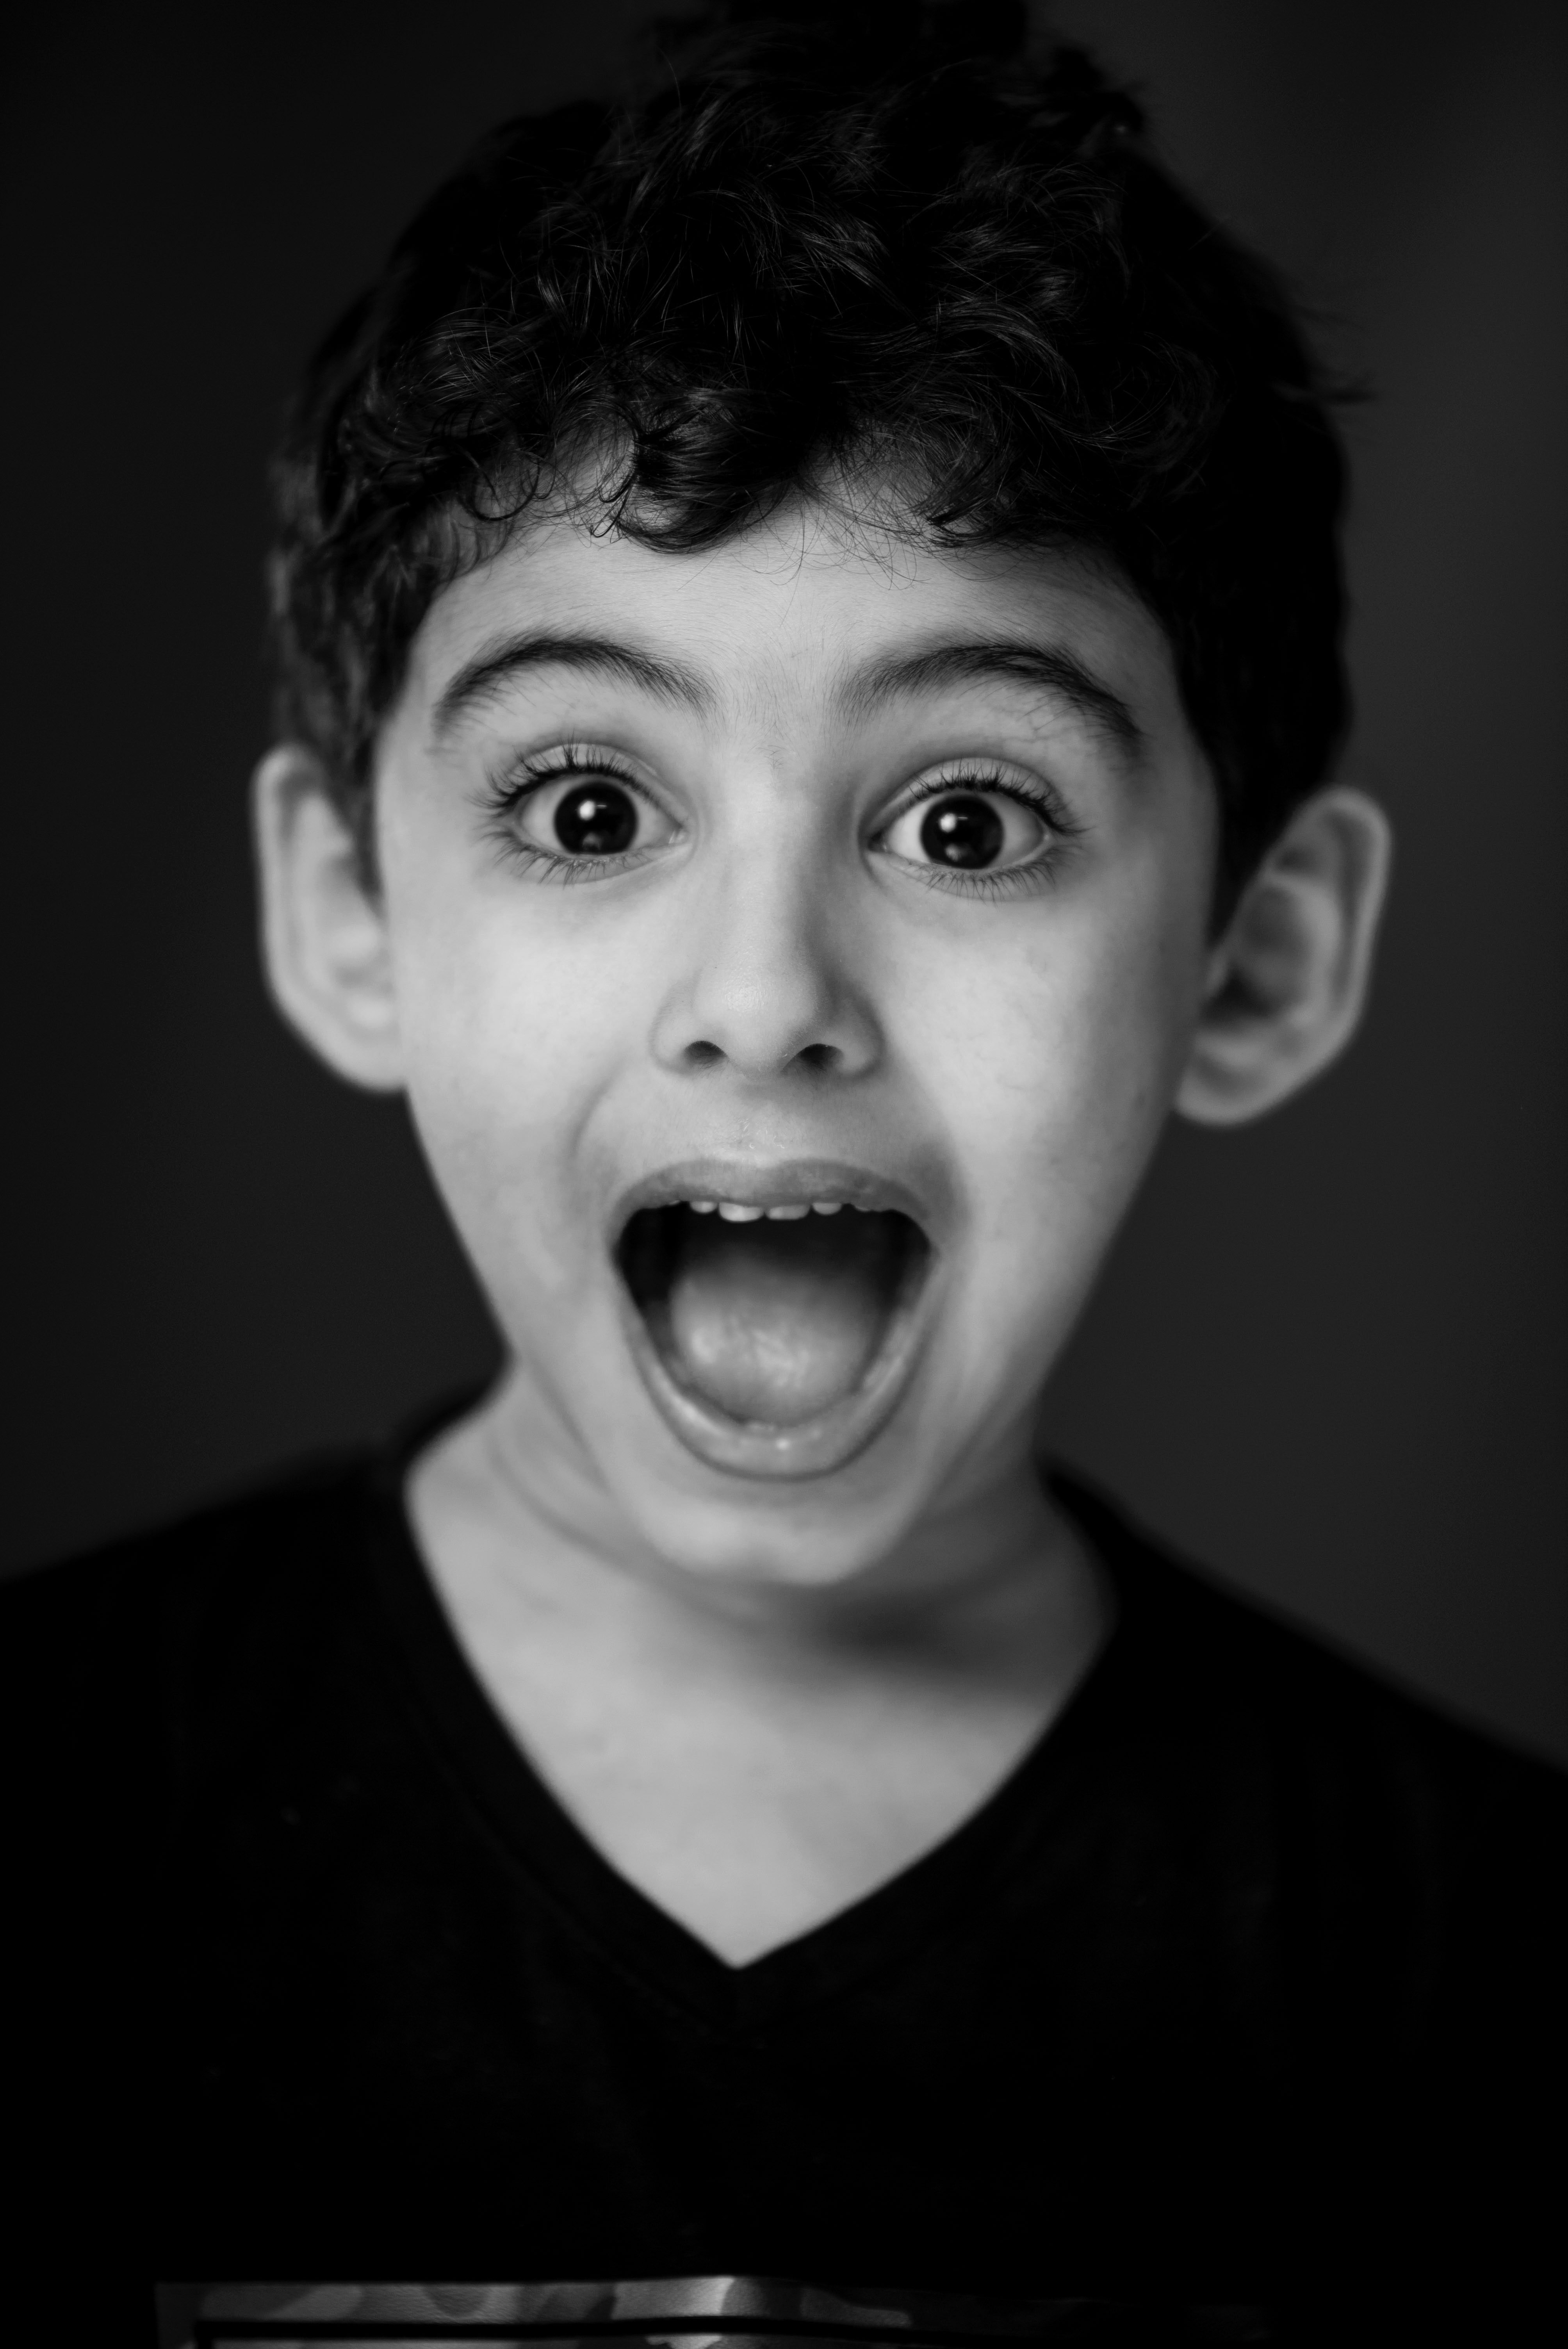 A boy with a shocked look. | Source: Pexels